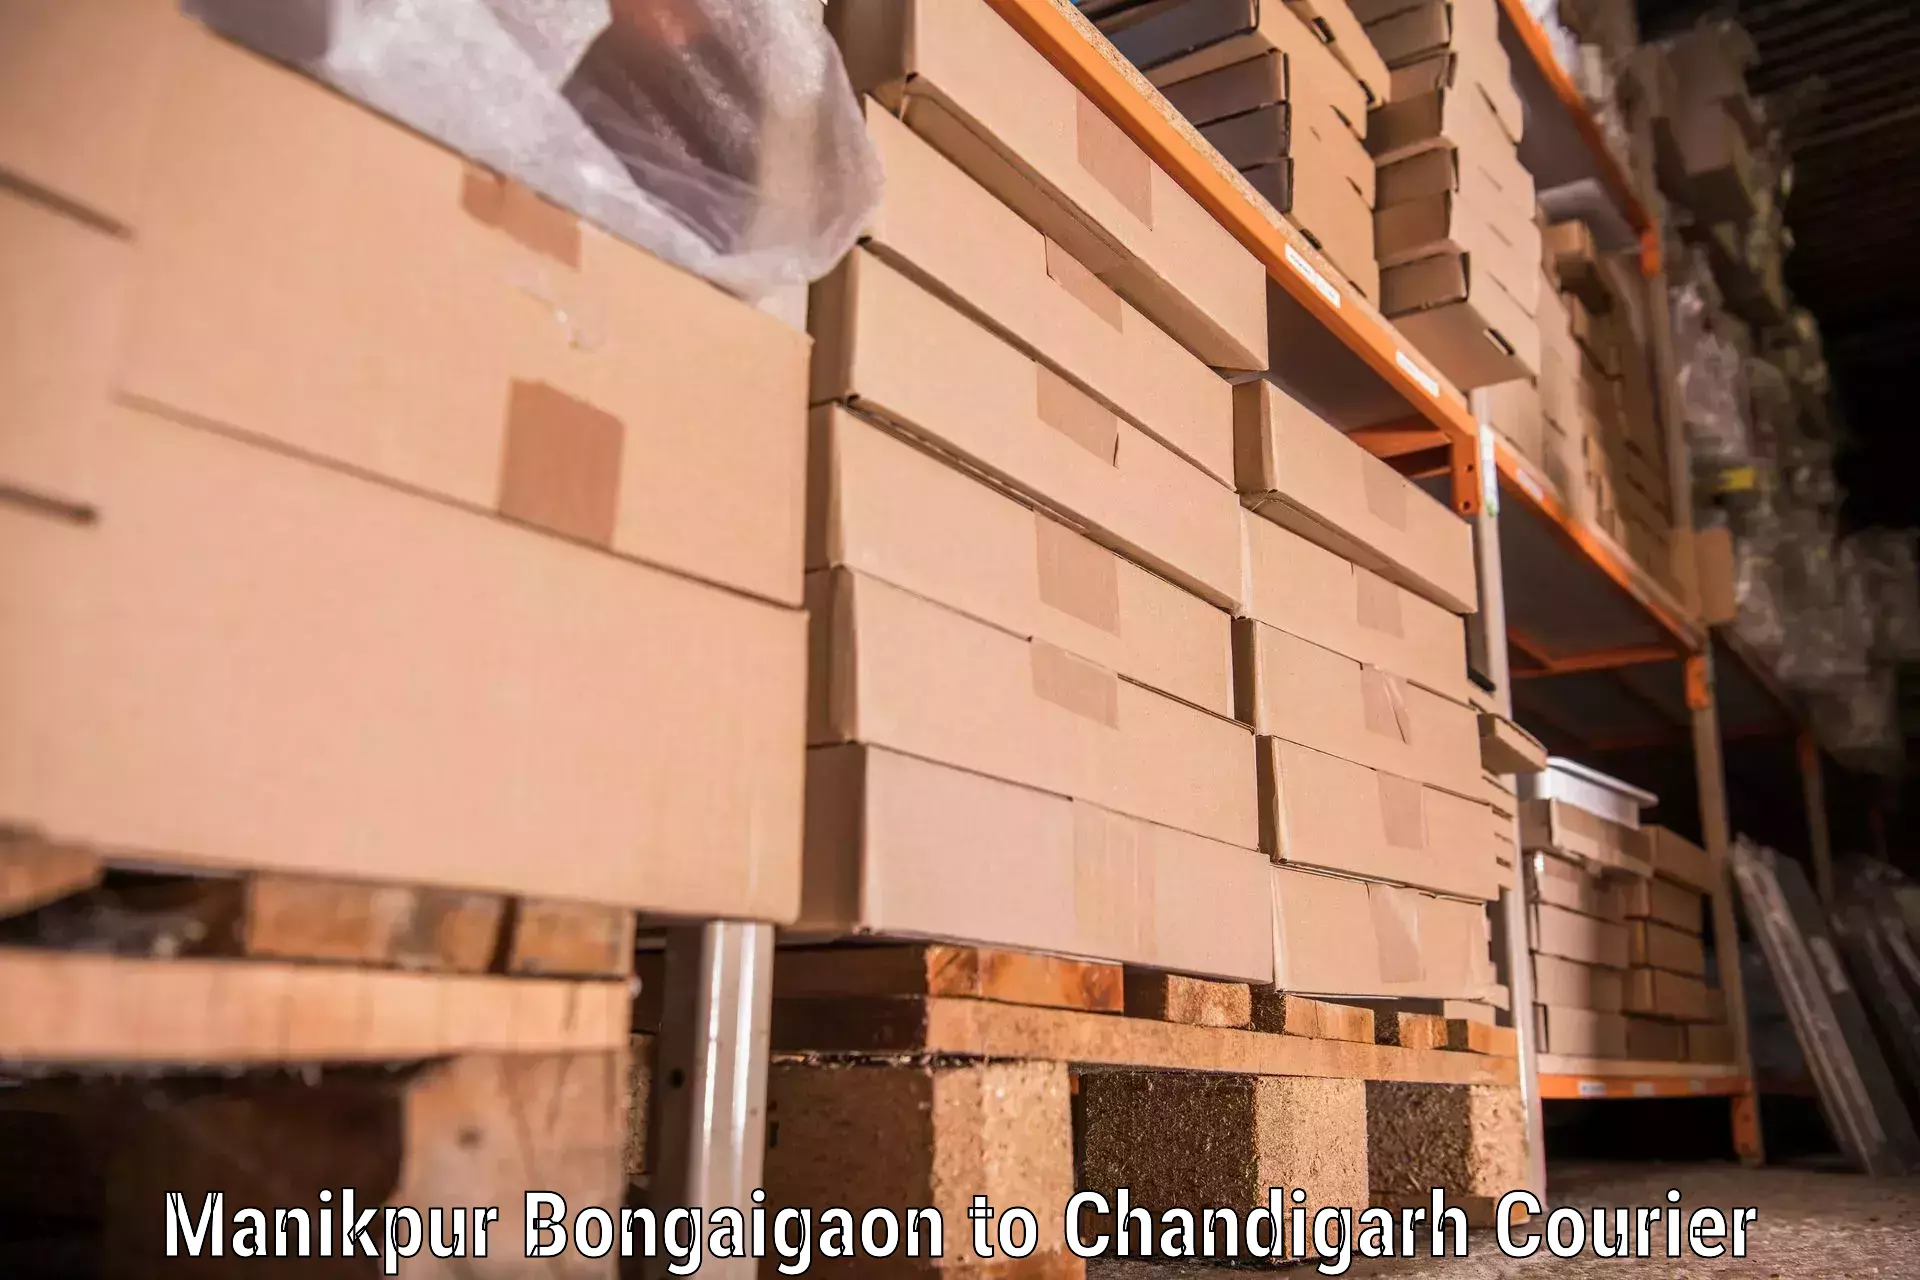 Furniture delivery service Manikpur Bongaigaon to Chandigarh